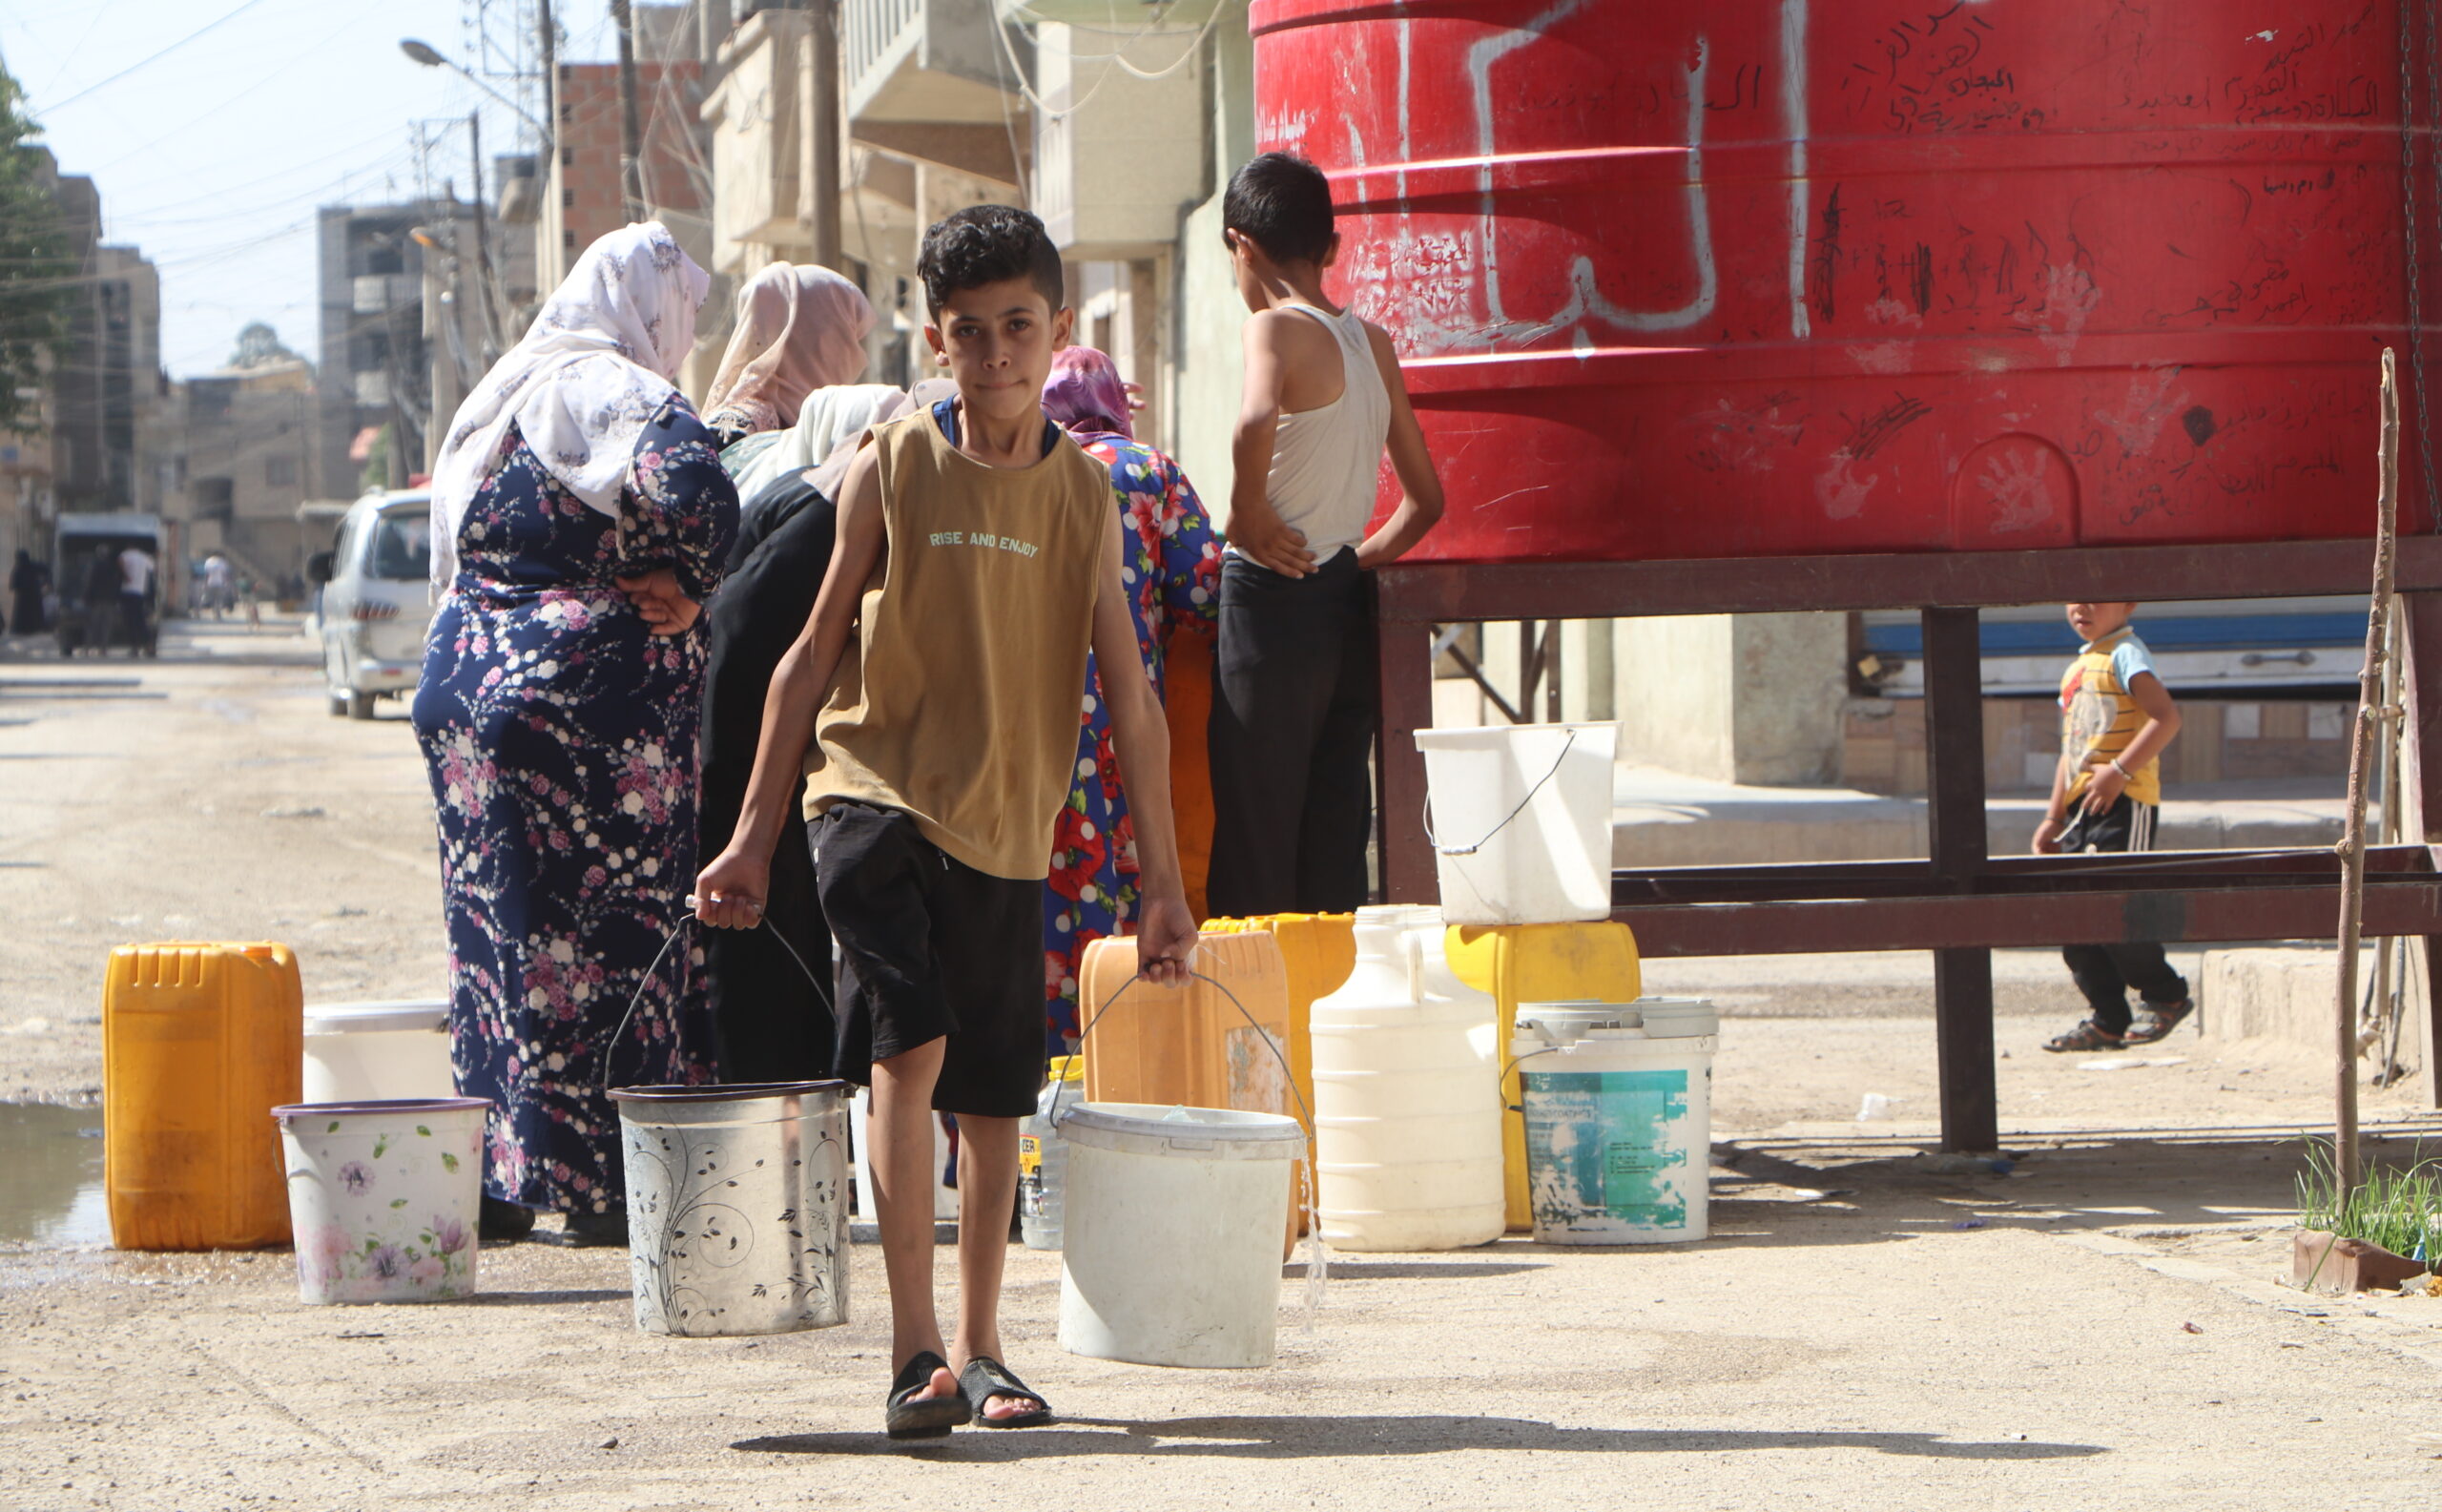 110 Syrian Organizations Condemn the Deprivation of Civilians in Northeast Syria of Their Right to Access Adequate and Safe Water